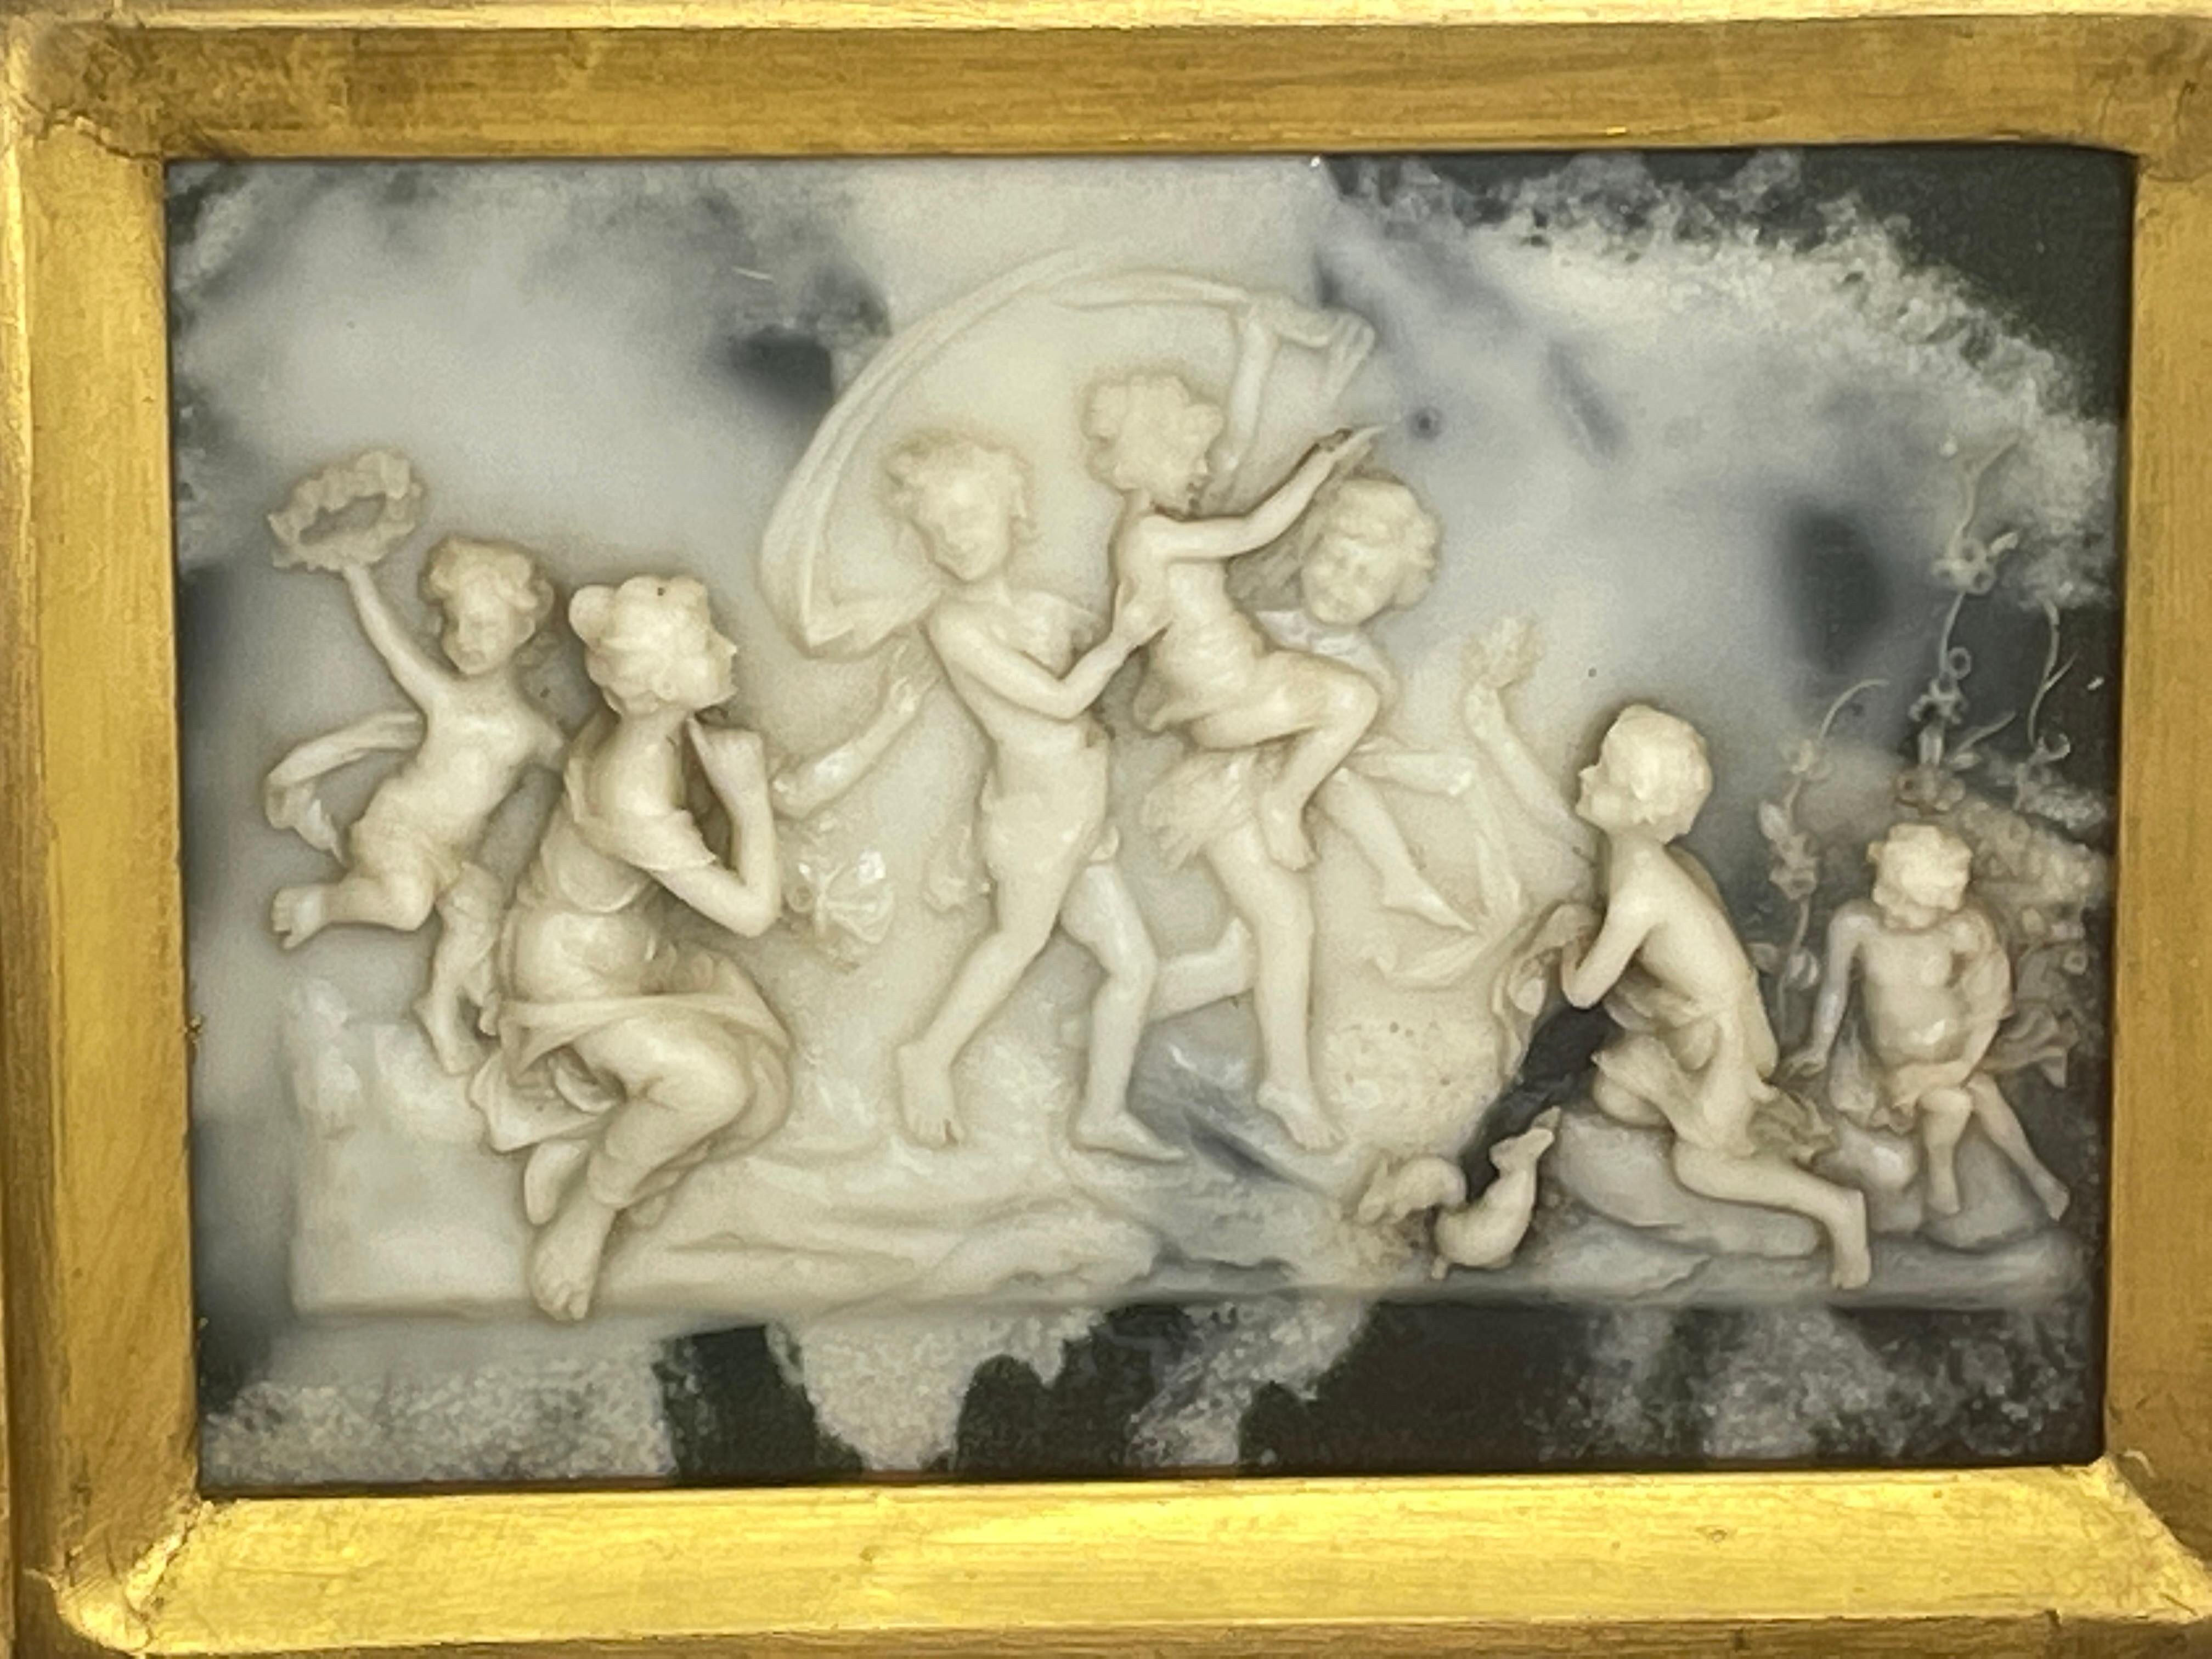 A beautiful, vintage alabaster handmade plate, framed with glass and gilt wood. Measuring 11.75